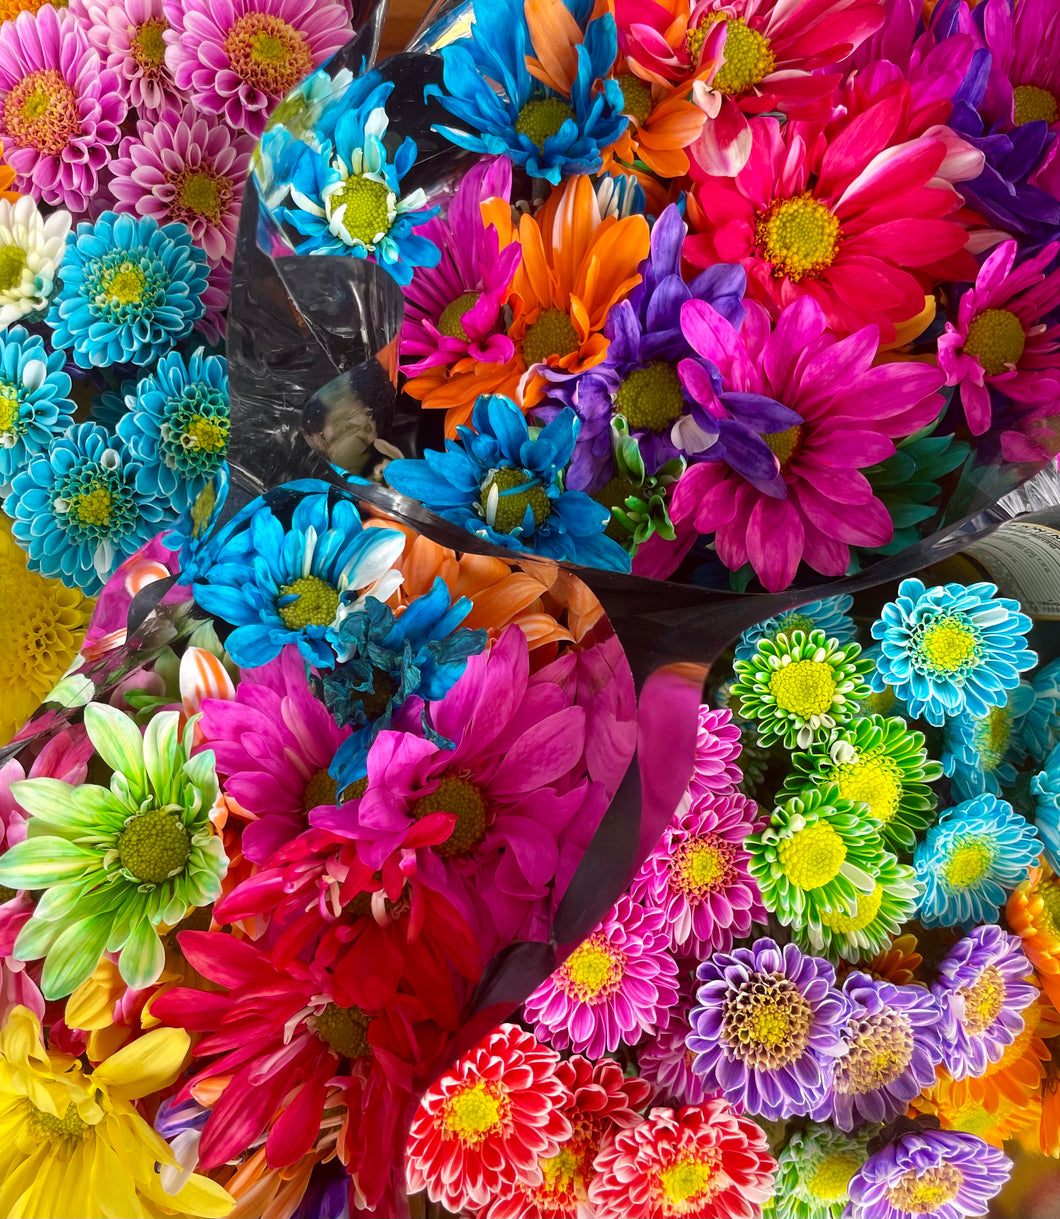 Mixed daisies in package